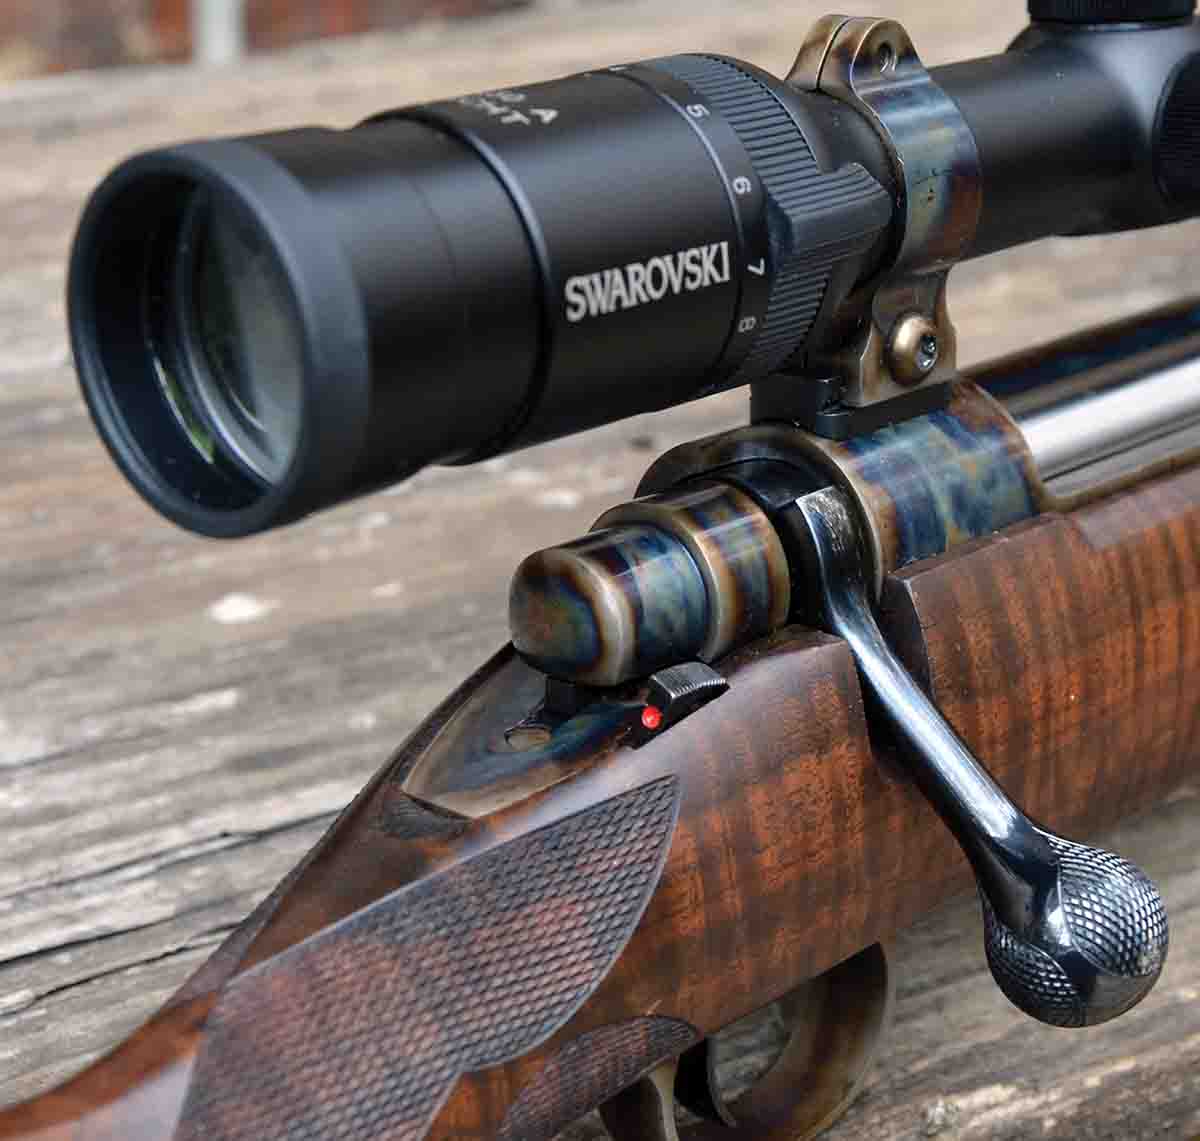 Case-coloring on the bolt shroud and rings and three-panel checkering on the bolt-handle knob make for a handsome hunting rifle.